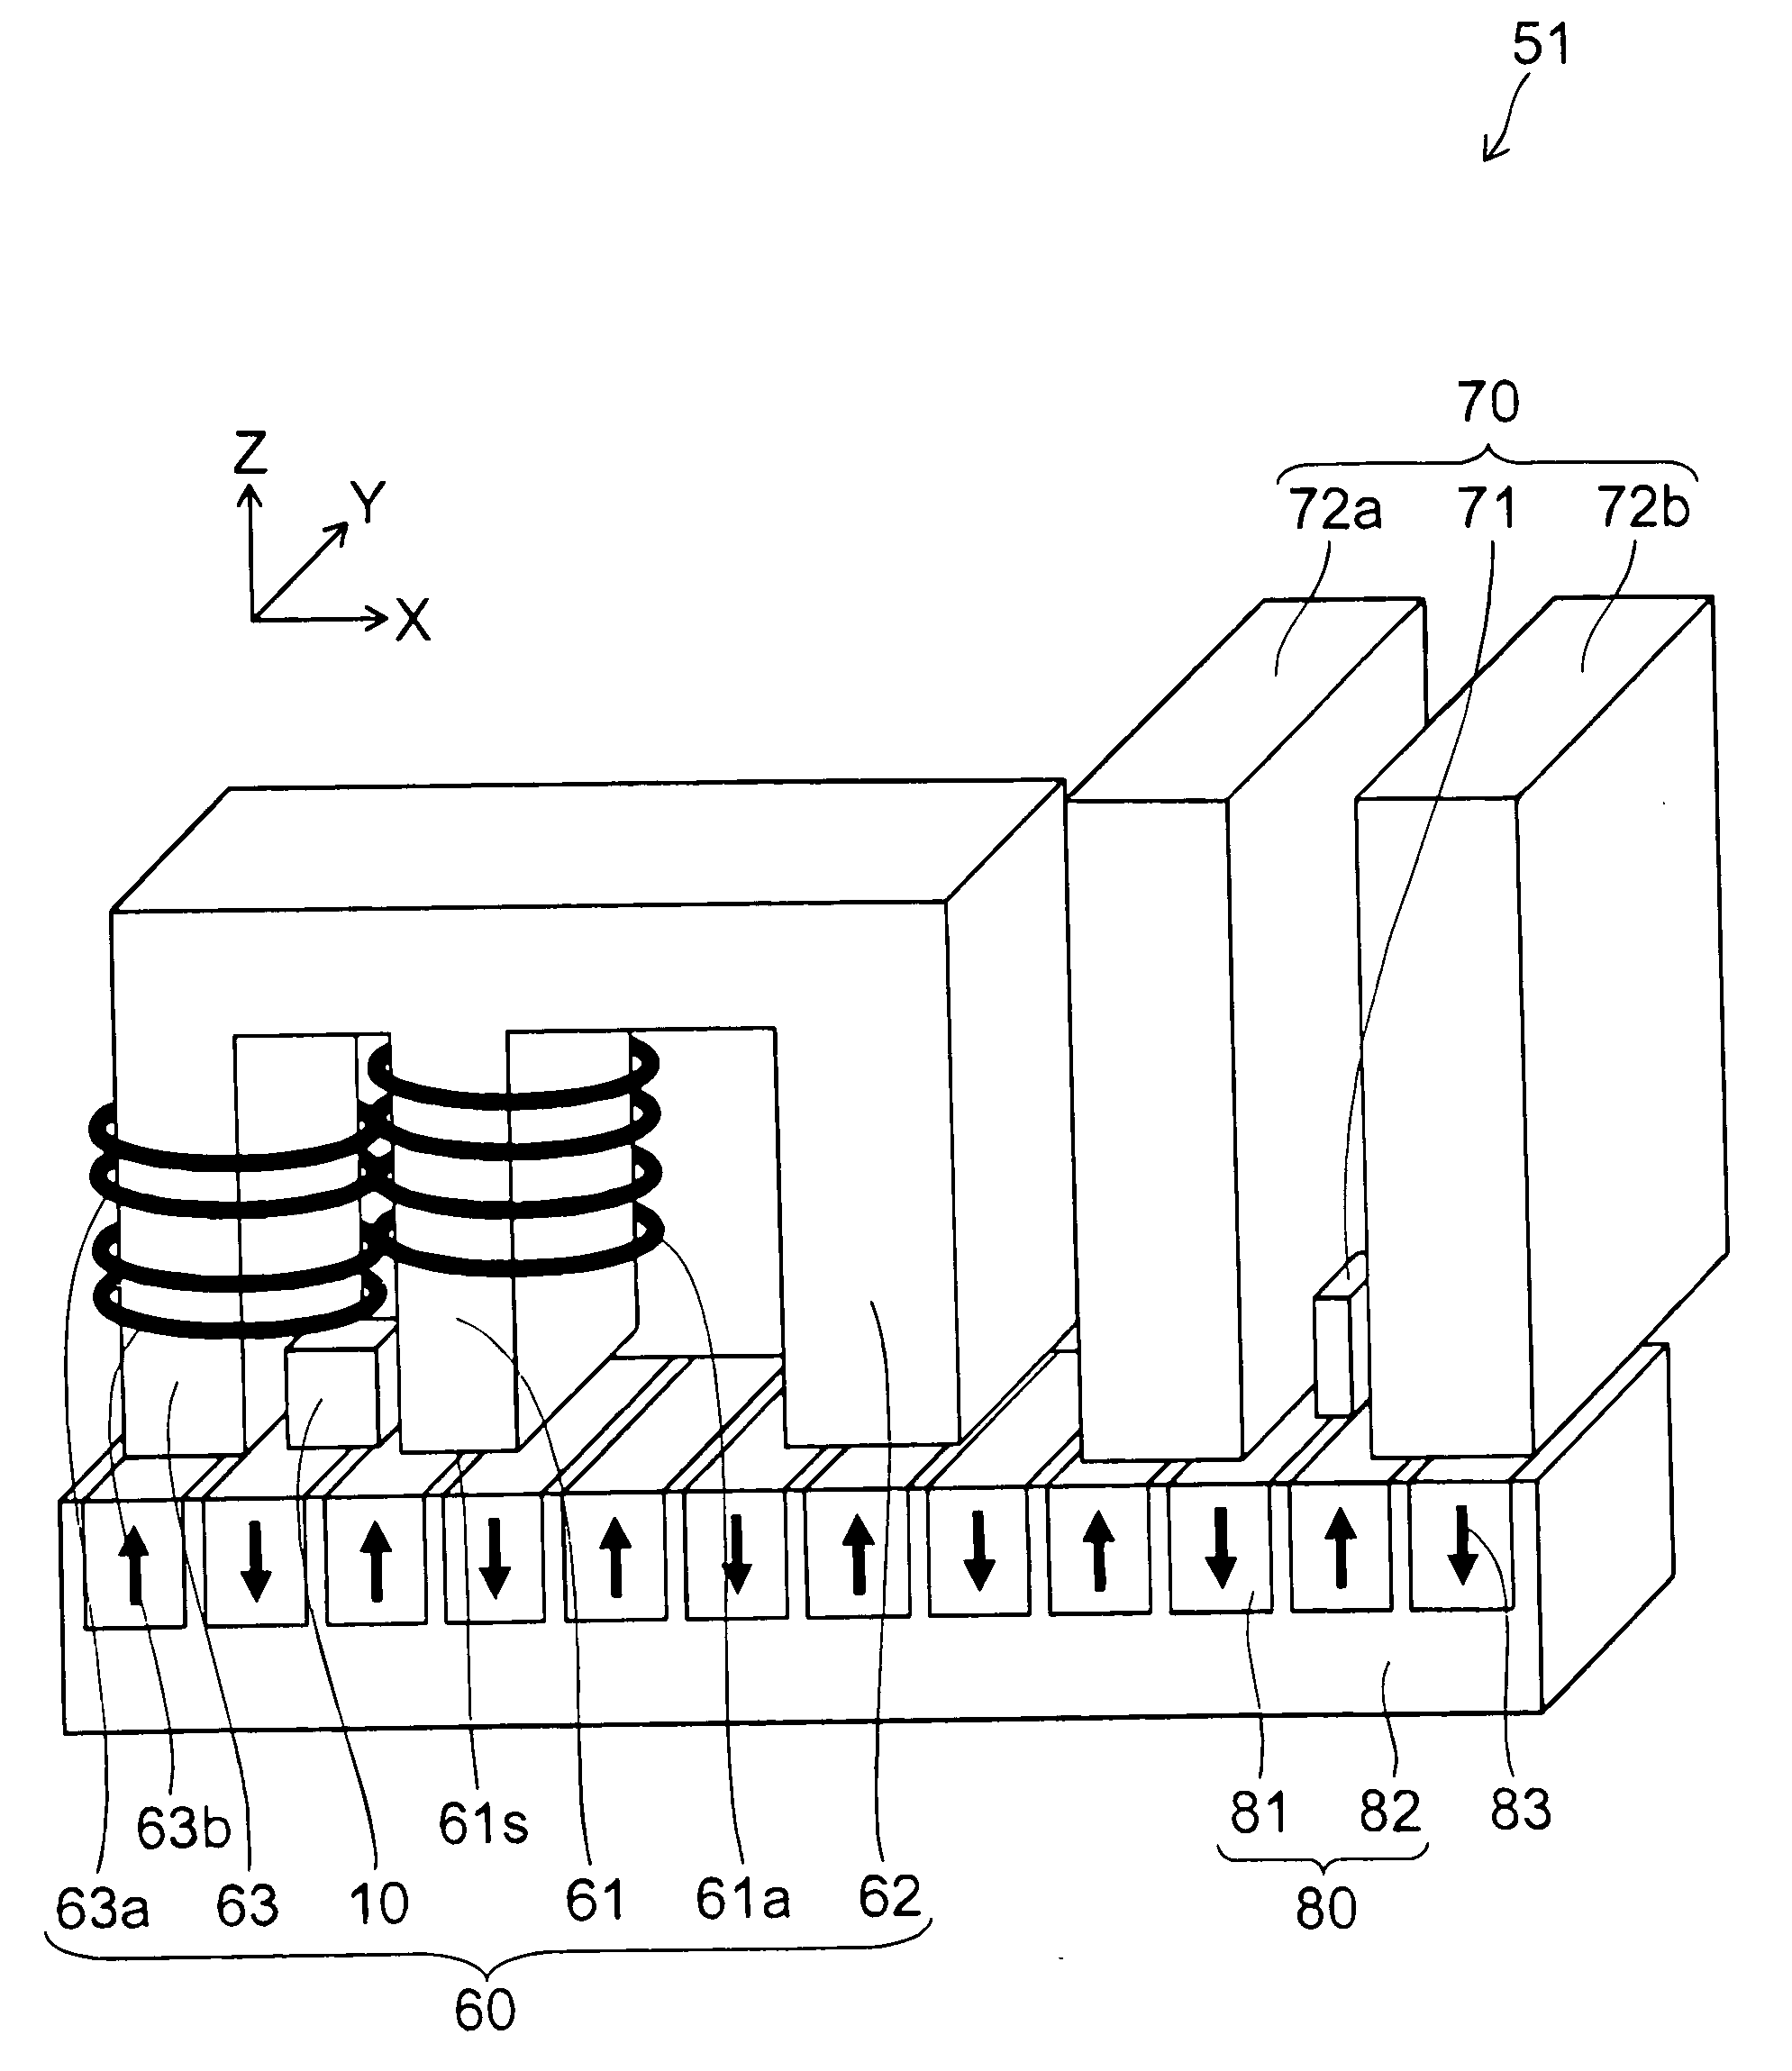 Magnetic recording head, magnetic head assembly, magnetic recording apparatus, and magnetic recording method